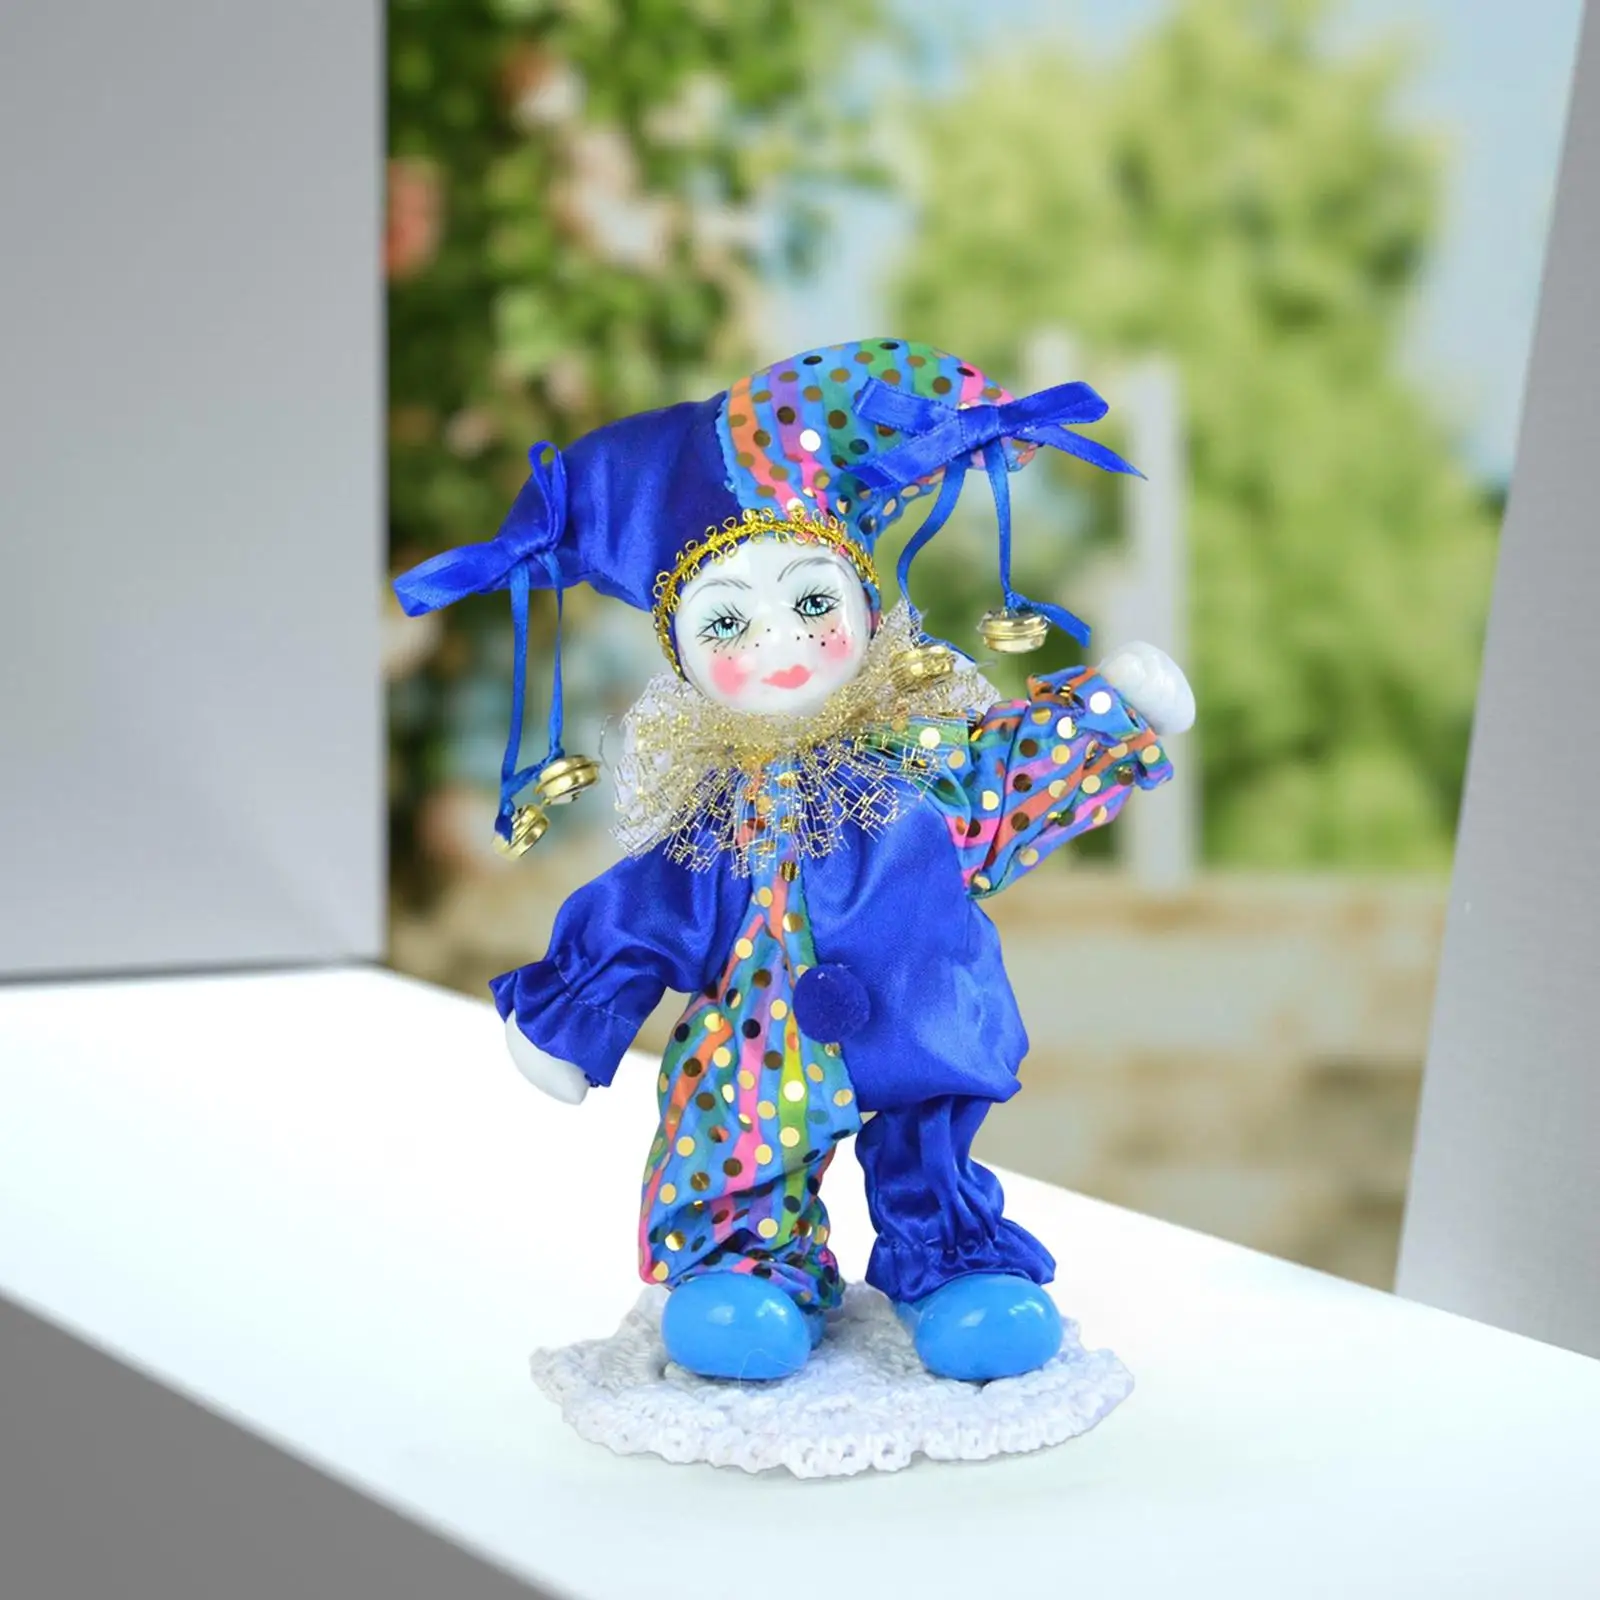 18cm Tall Clown Doll Figurine Arts Crafts Angle Model for Souvenirs Holiday